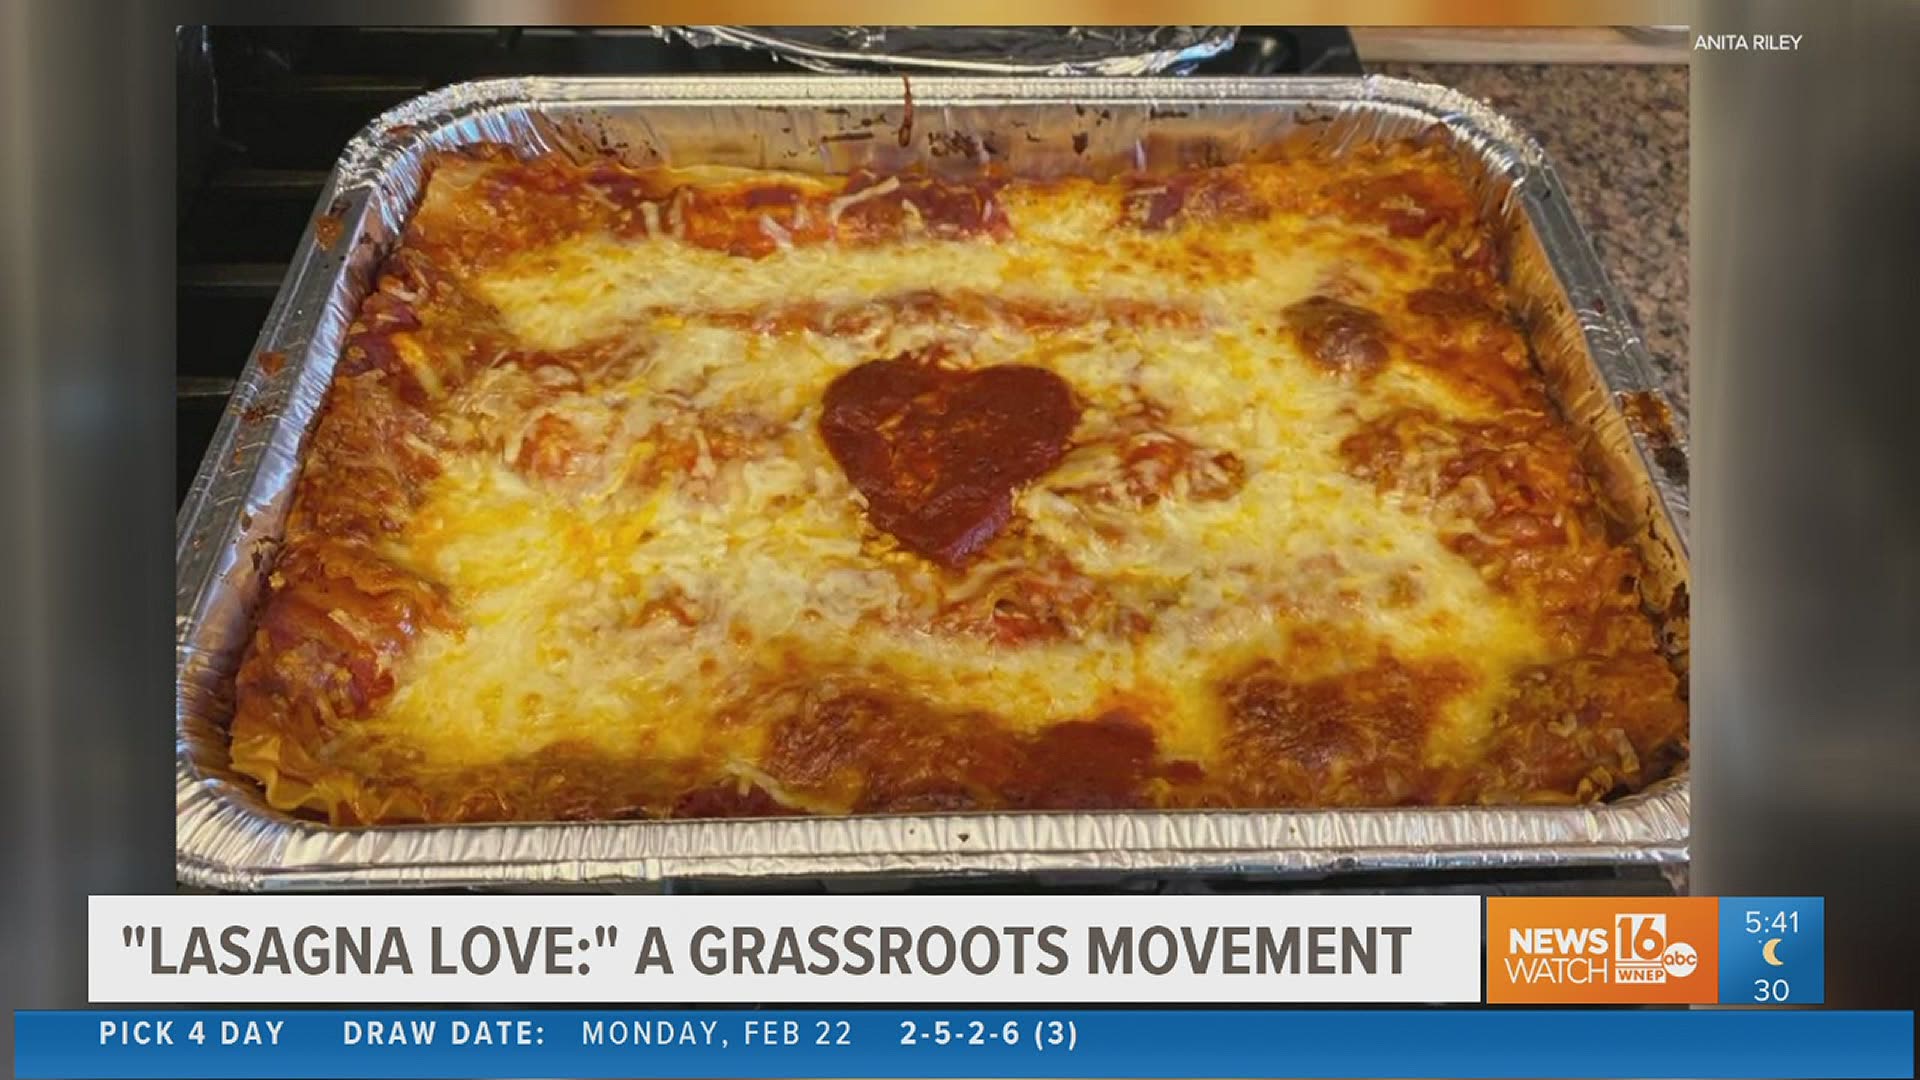 Whether you love to bake lasagna or just eat it, this grassroots movement is for you. Newswatch 16's Ryan Leckey has the scoop on how to get involved.